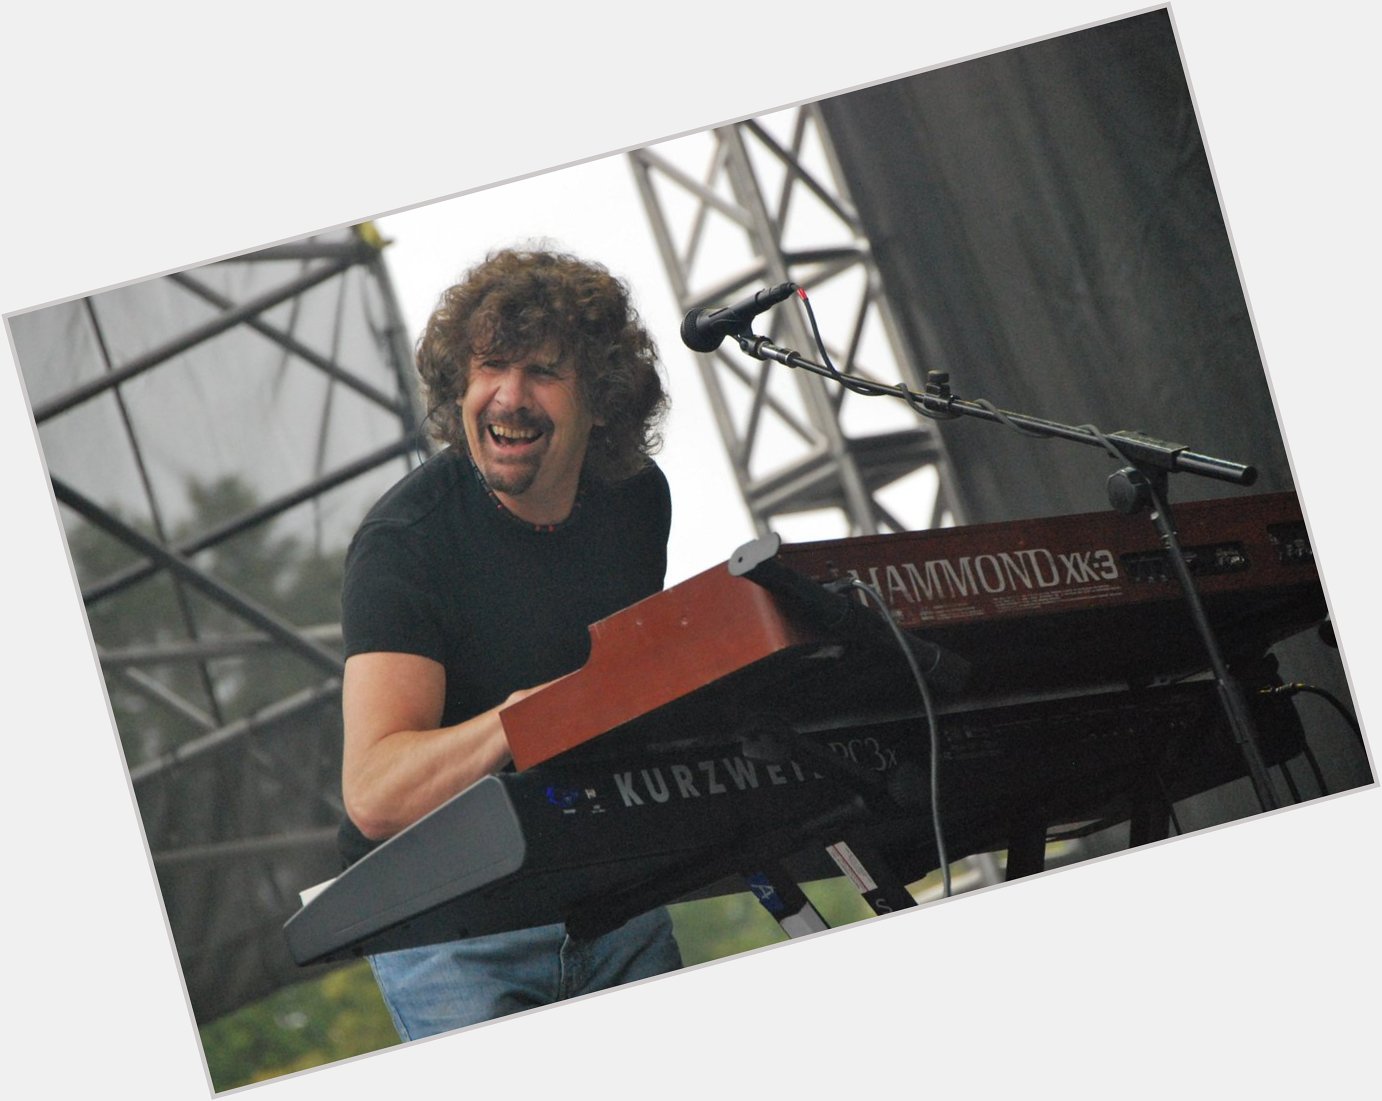 Happy Birthday to Rod Argent of One of the coolest guests we have ever featured on the show! 